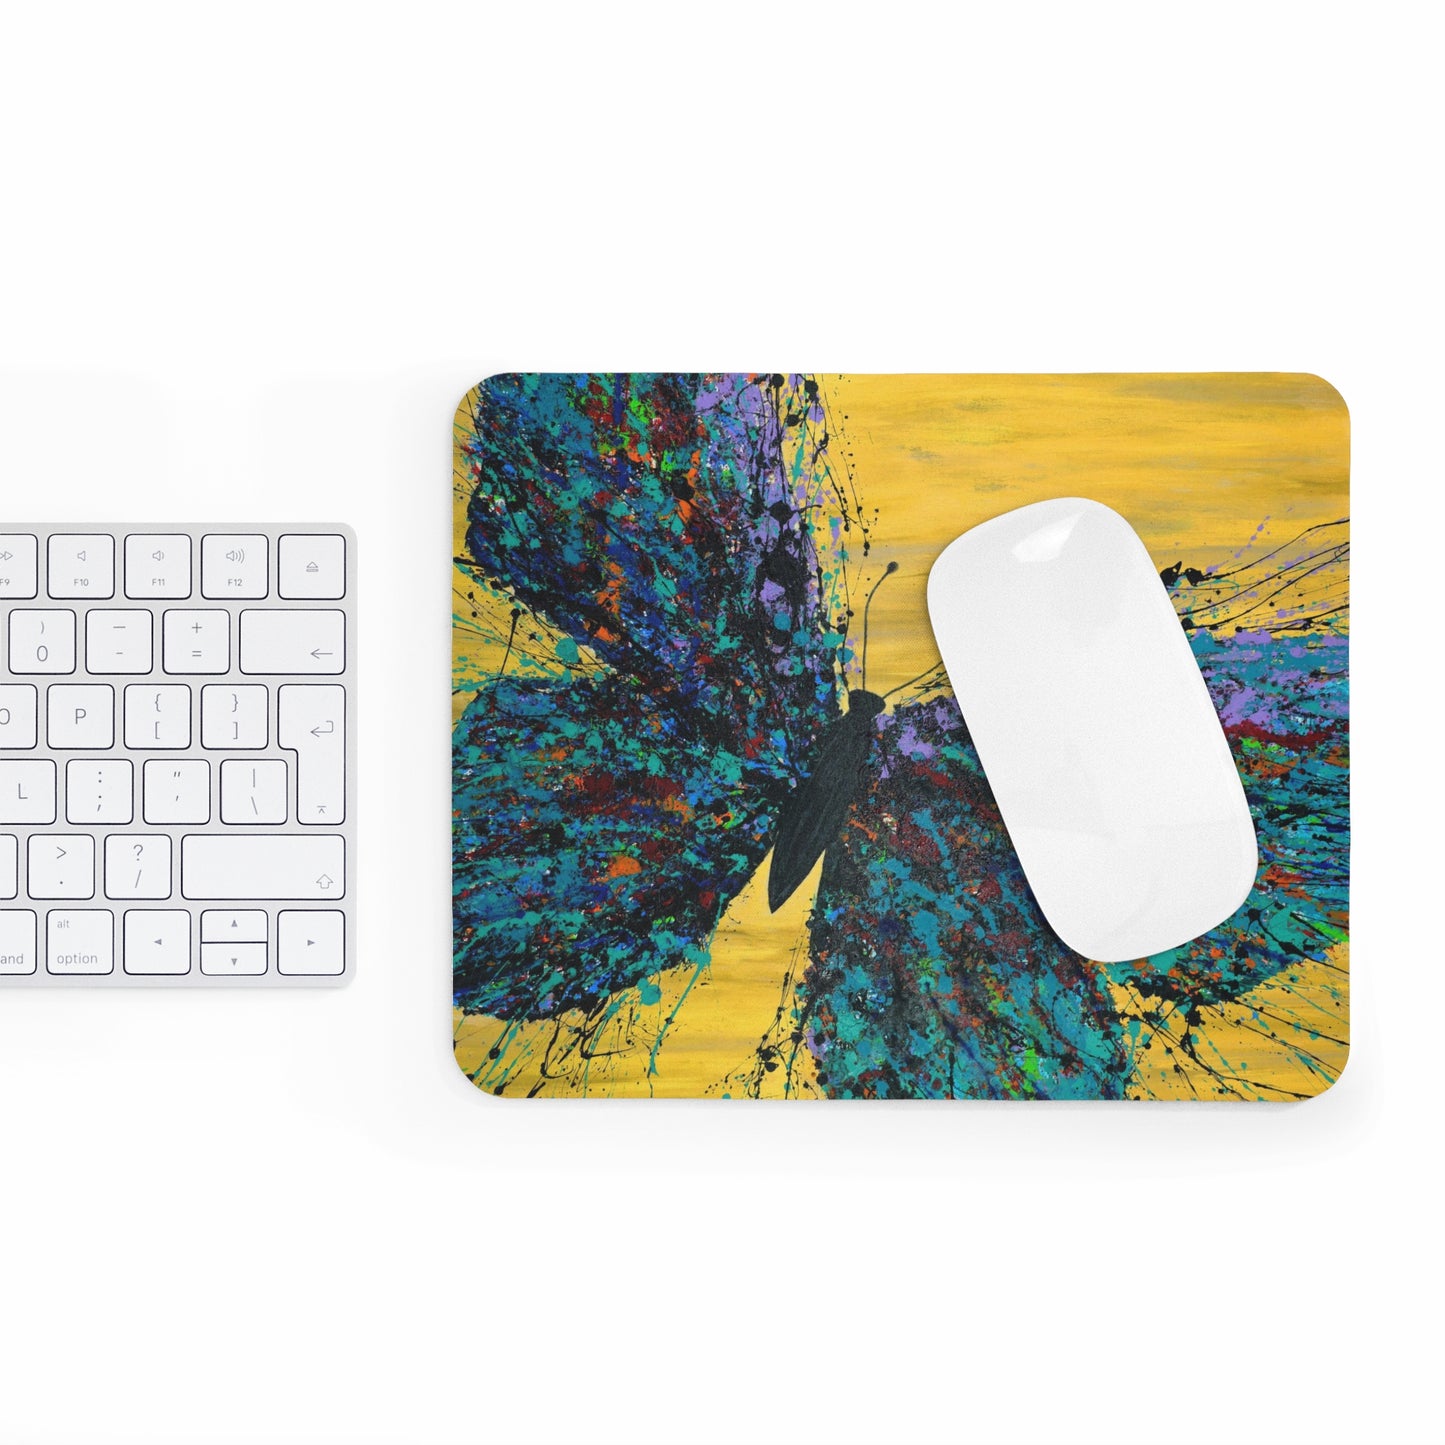 MOUSE PAD - MAGIC IN NATURE